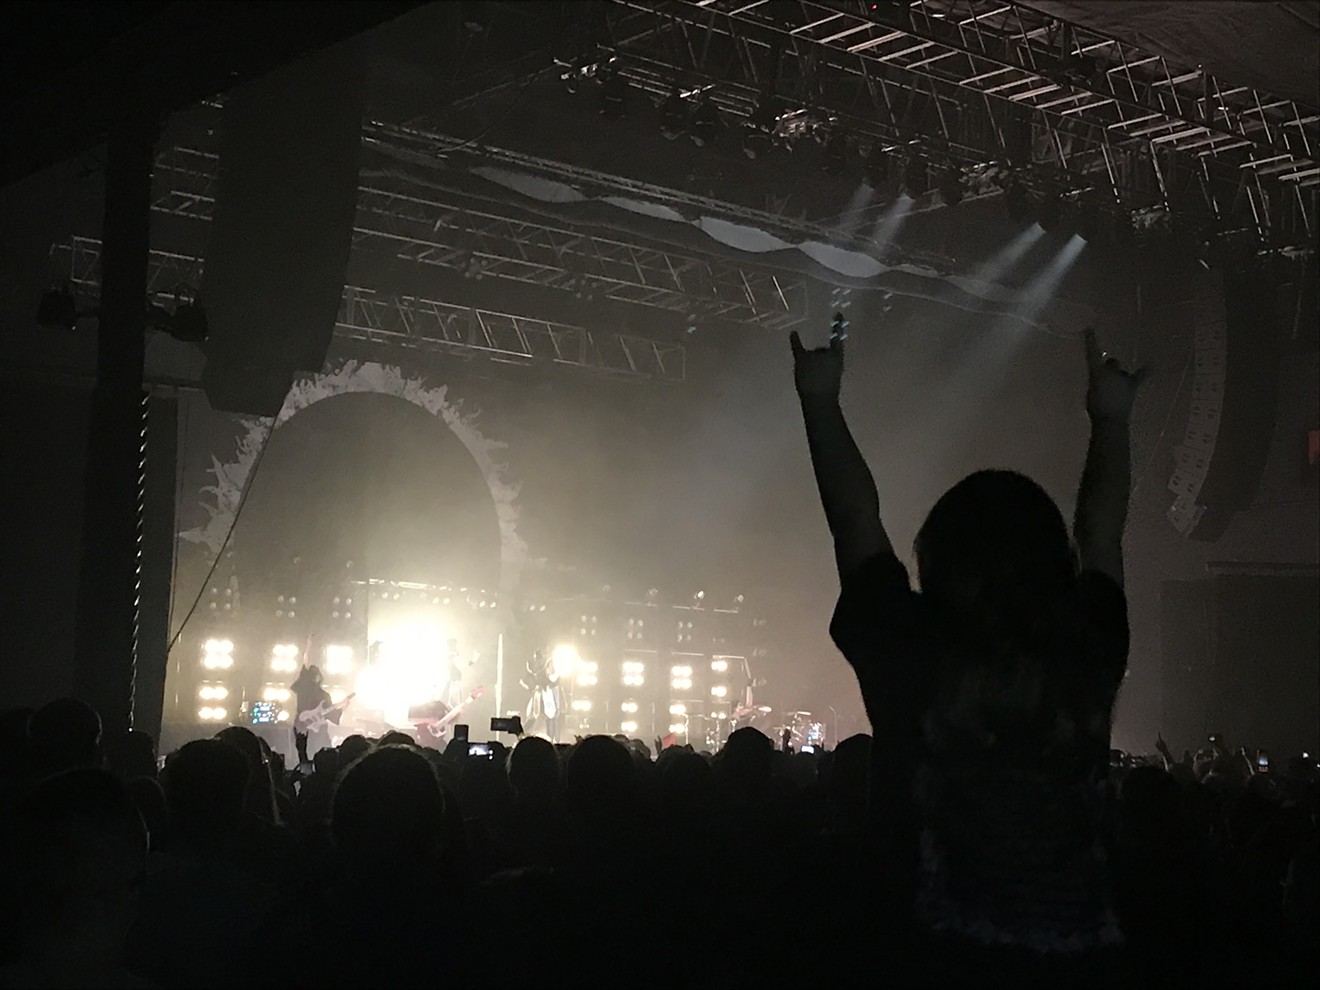 There were more than a few kids embracing metal at the BABYMETAL show.